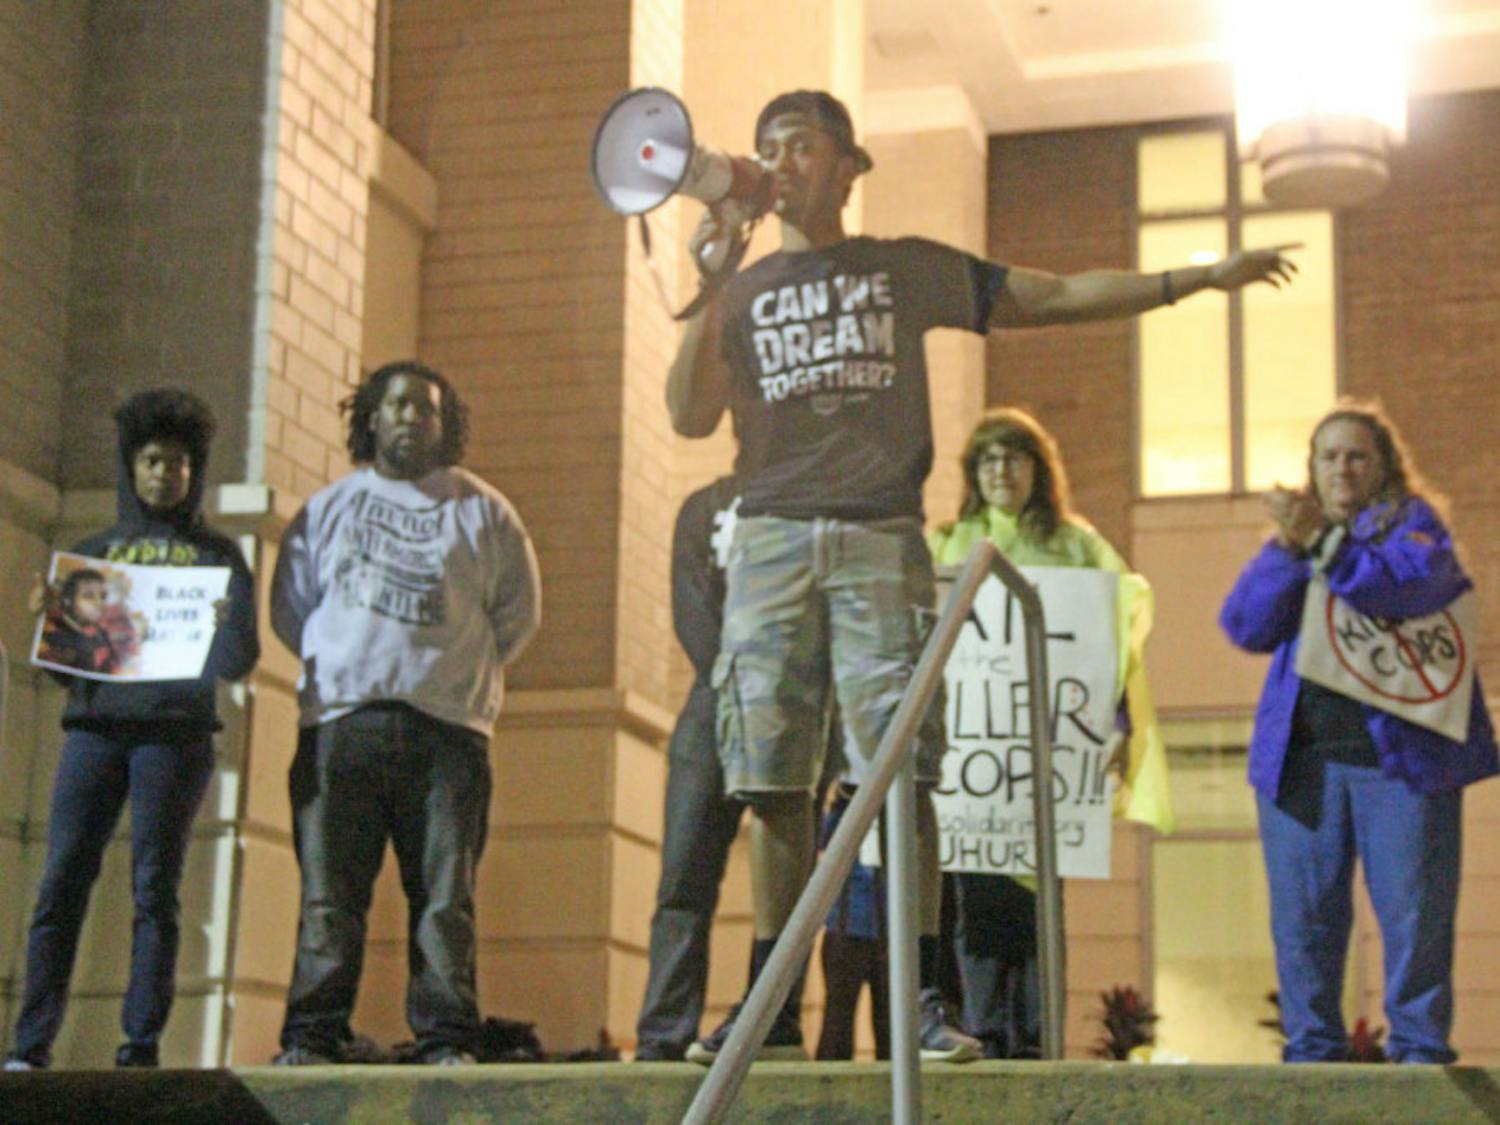 Azaari Mason, a 19-year-old UF political science junior, speaks to a crowd of people at the Gainesville Courthouse downtown&nbsp;Tuesday&nbsp;evening.&nbsp;